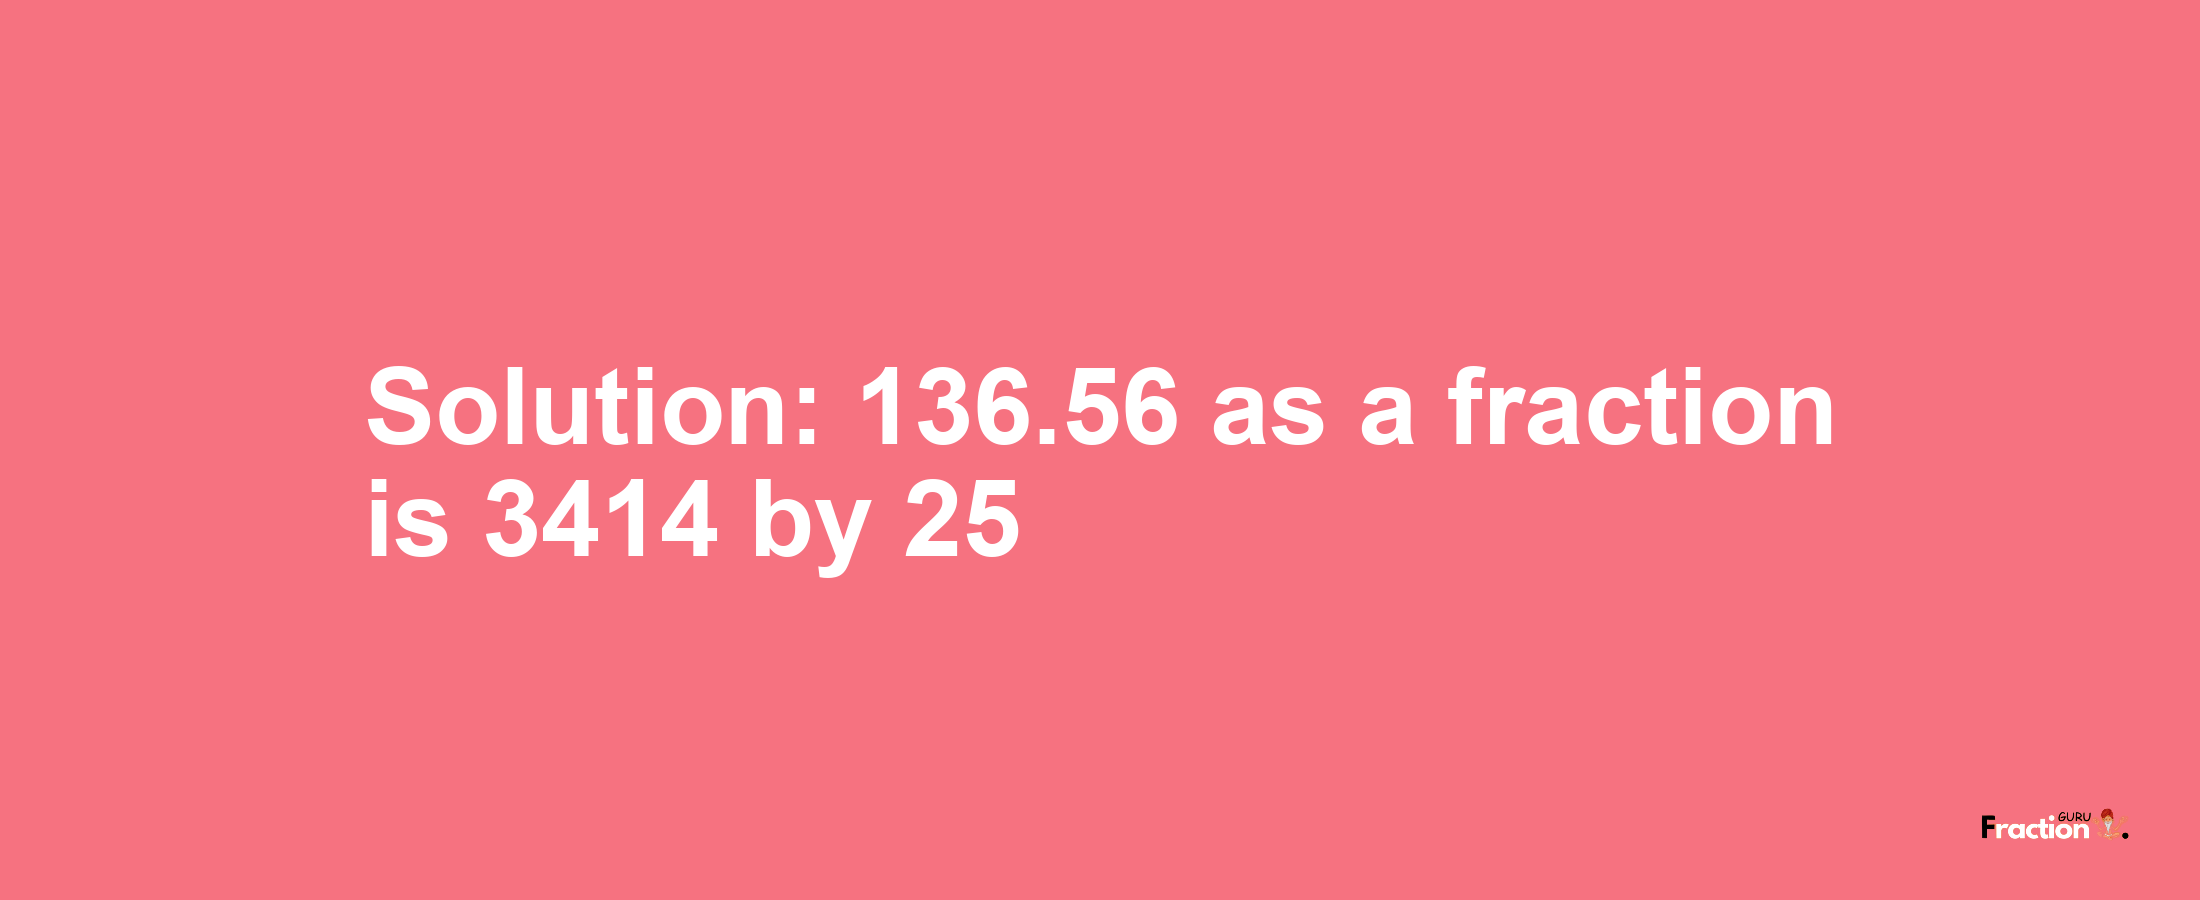 Solution:136.56 as a fraction is 3414/25